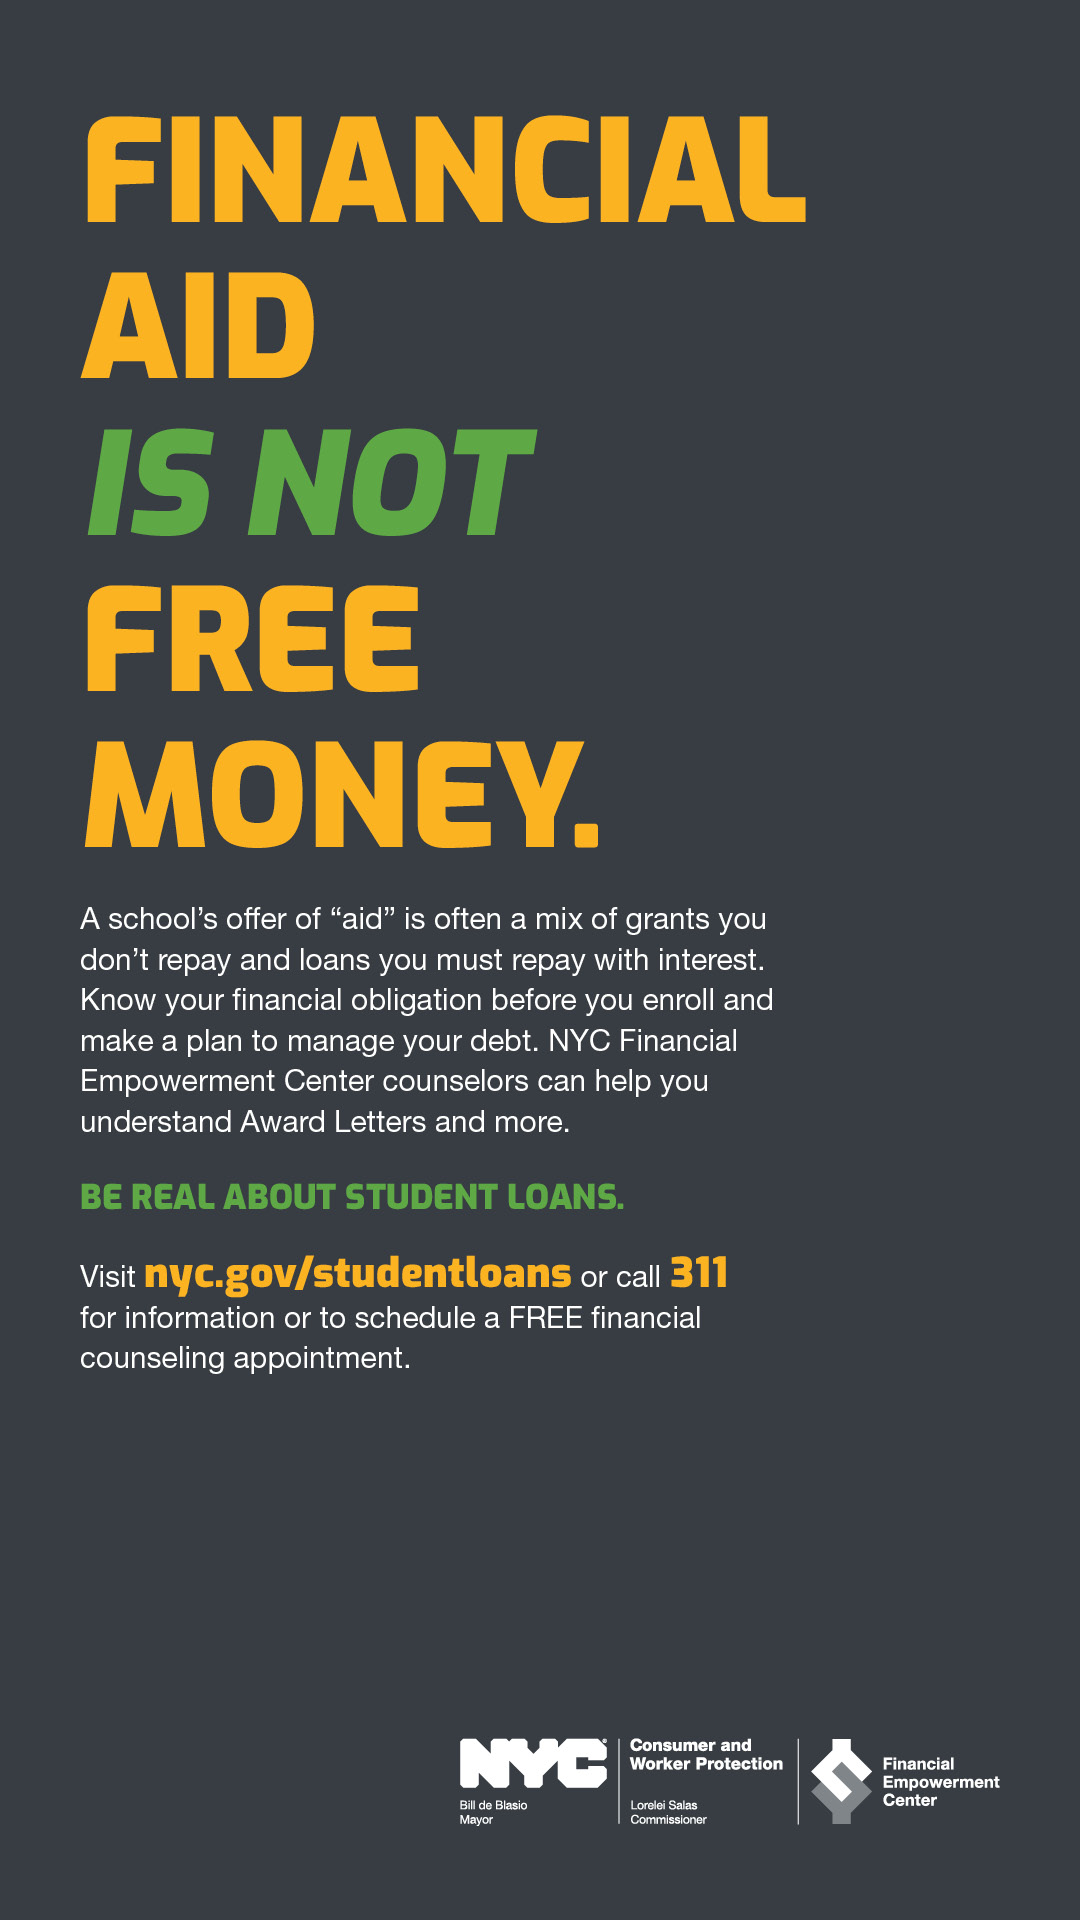 Ad with text FINANCIAL AID IS NOT FREE MONEY